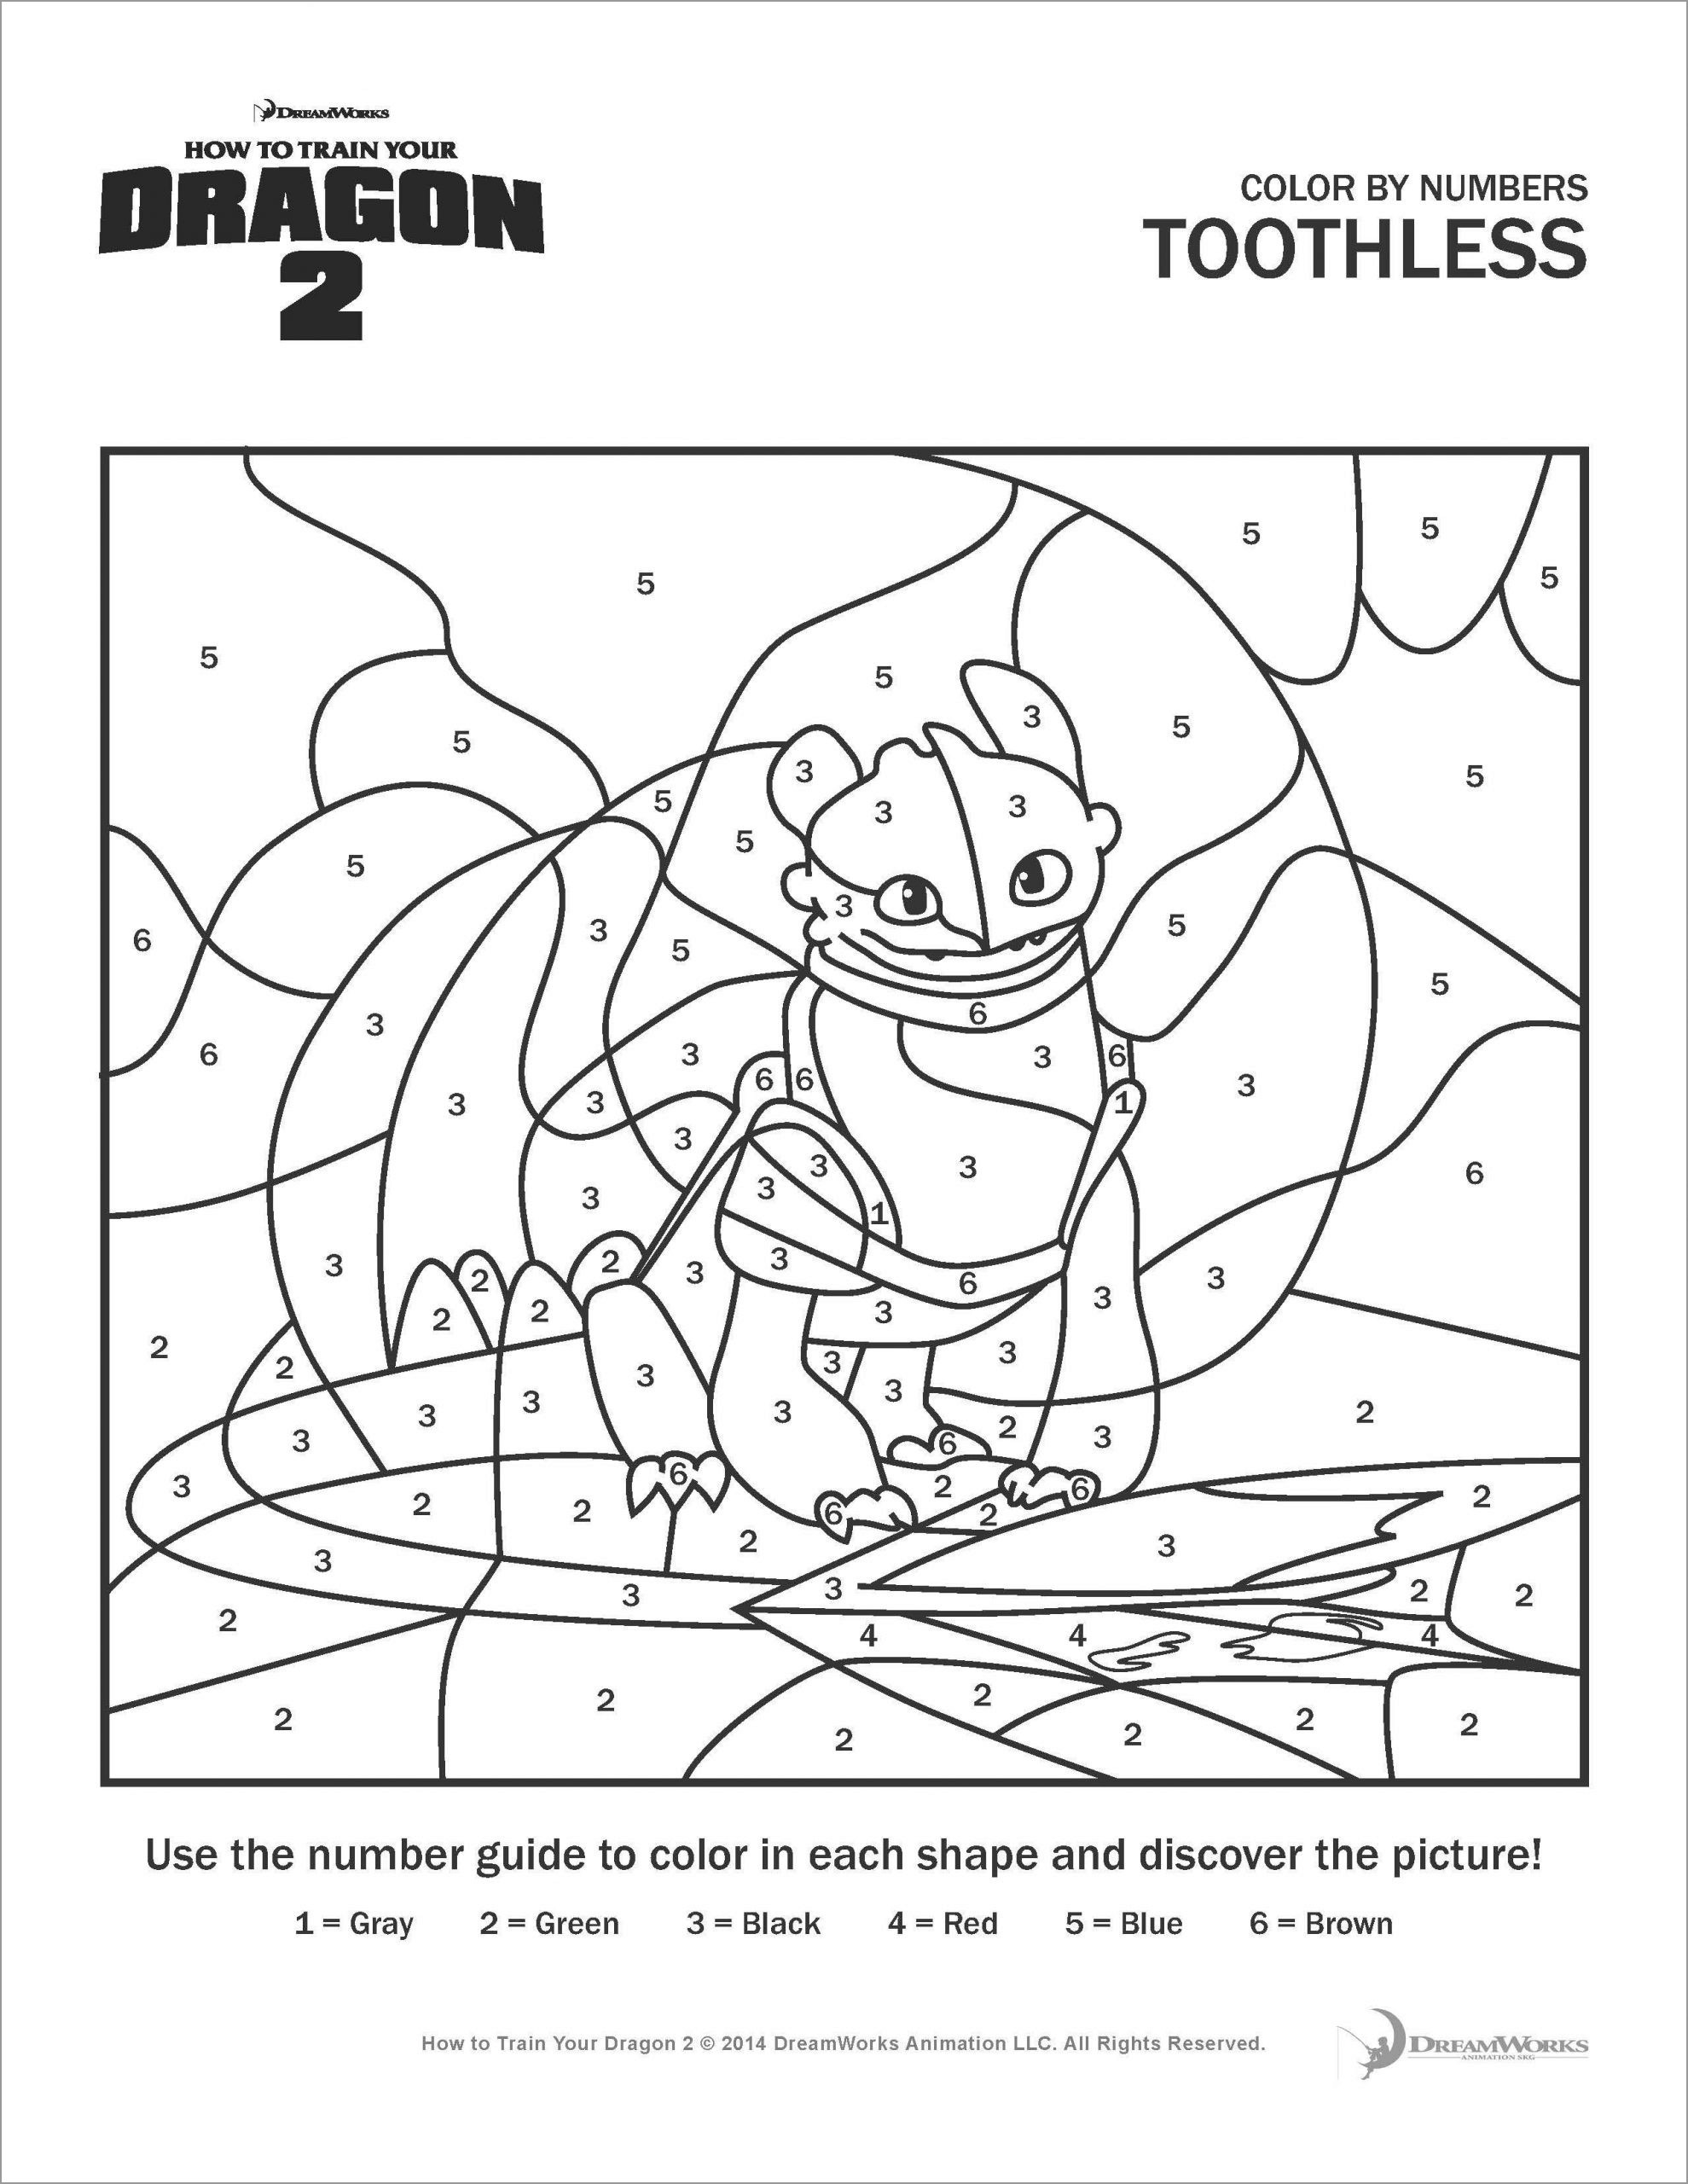 How To Train Your Dragon Toothless Color By Number Coloring Page Coloringbay